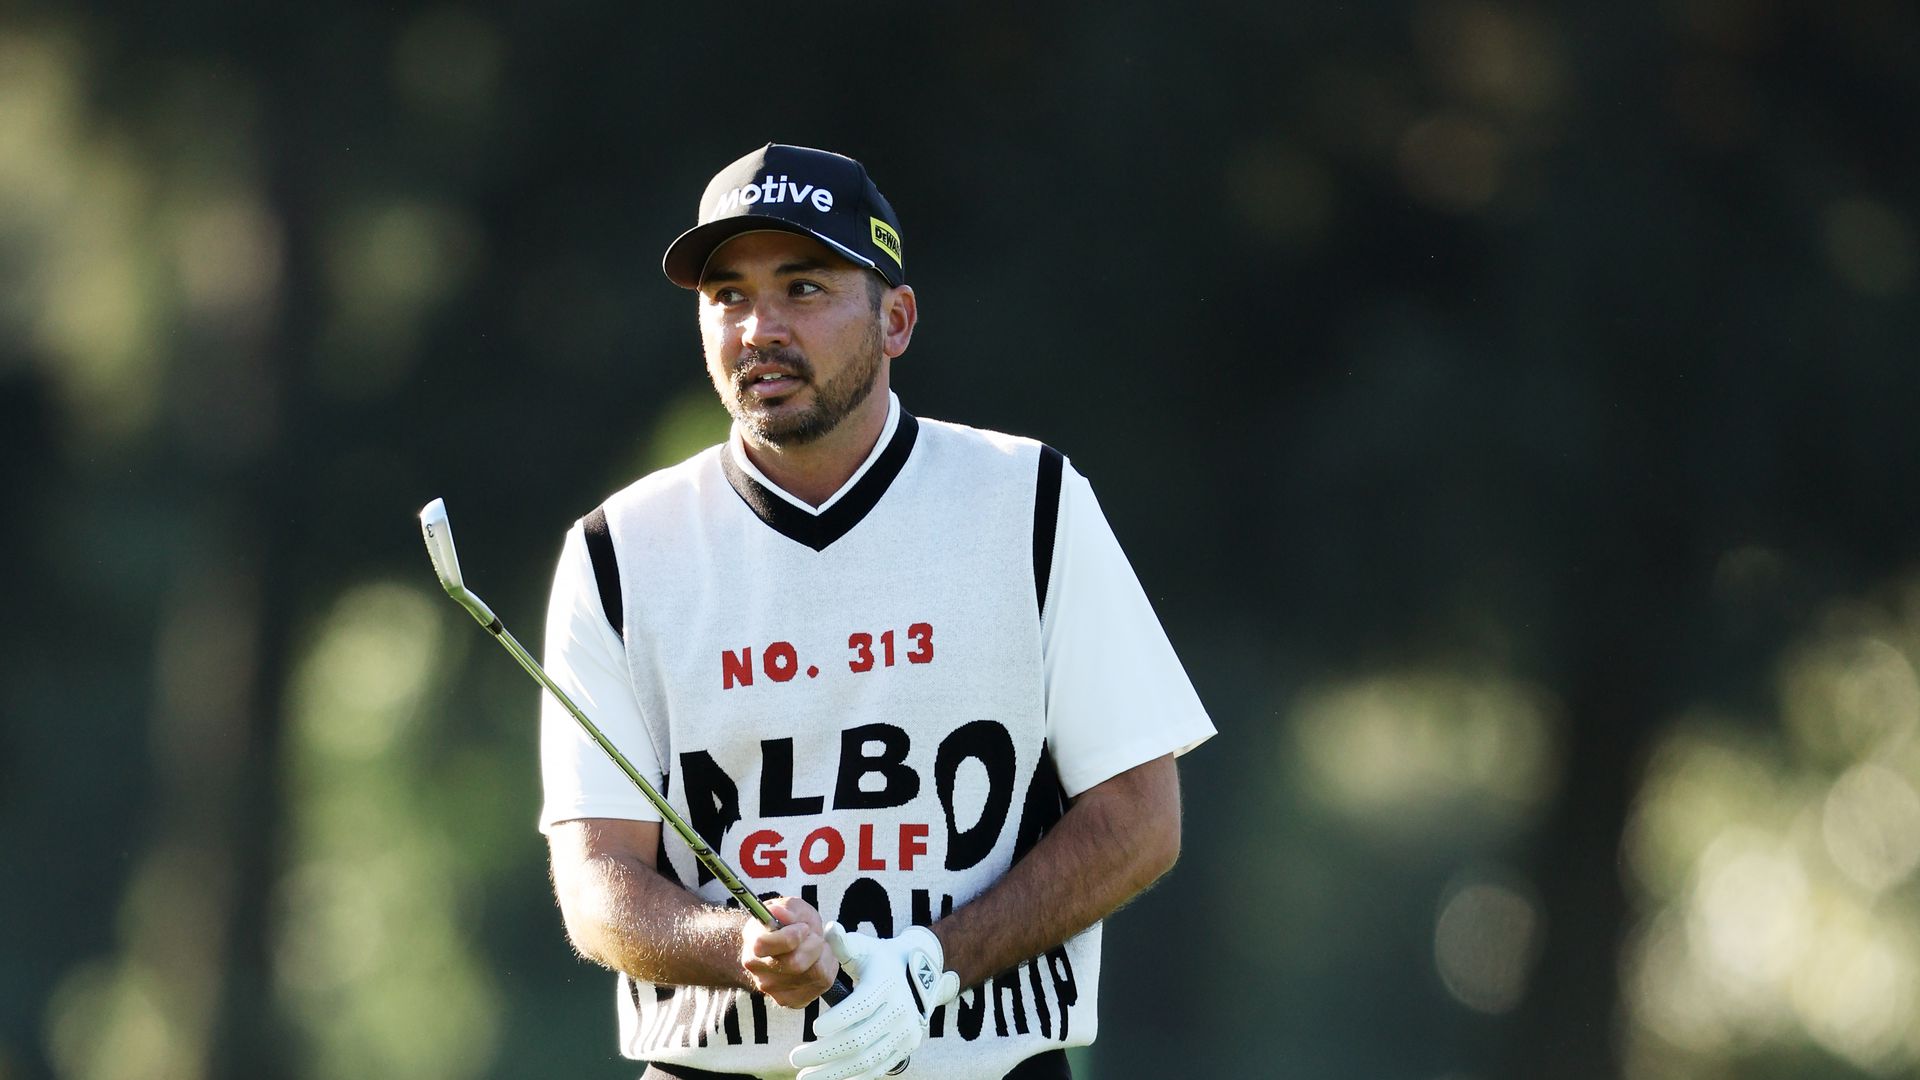 jason day’s masters outfits are the talk of augusta national with priceless reactions